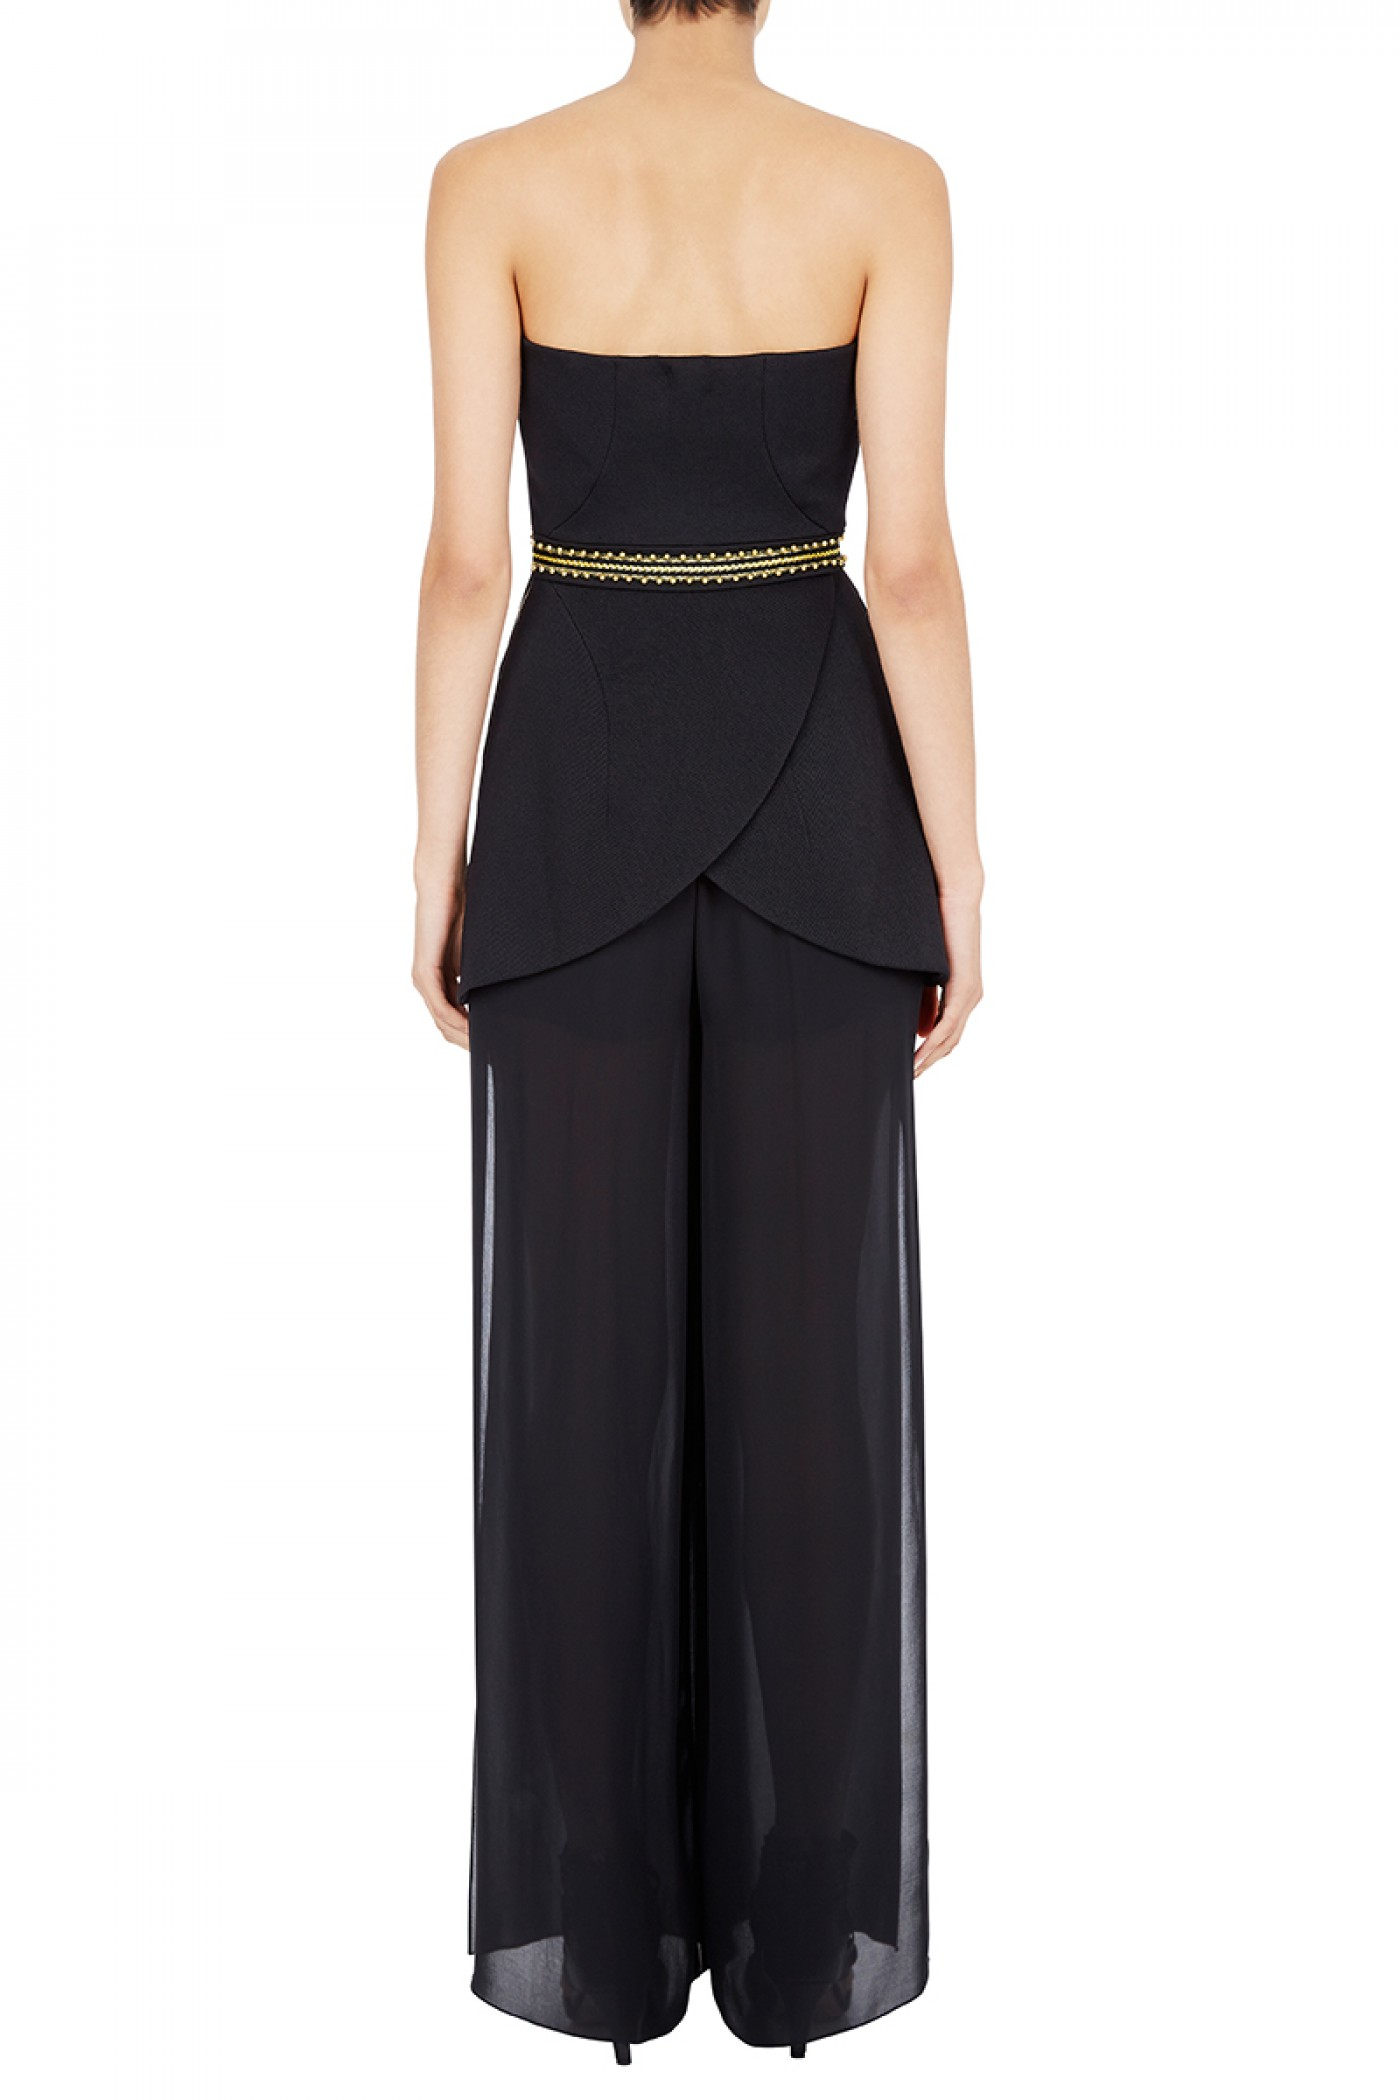 Lyst Sass And Bide Give A Cheer Combo Jumpsuit In Black